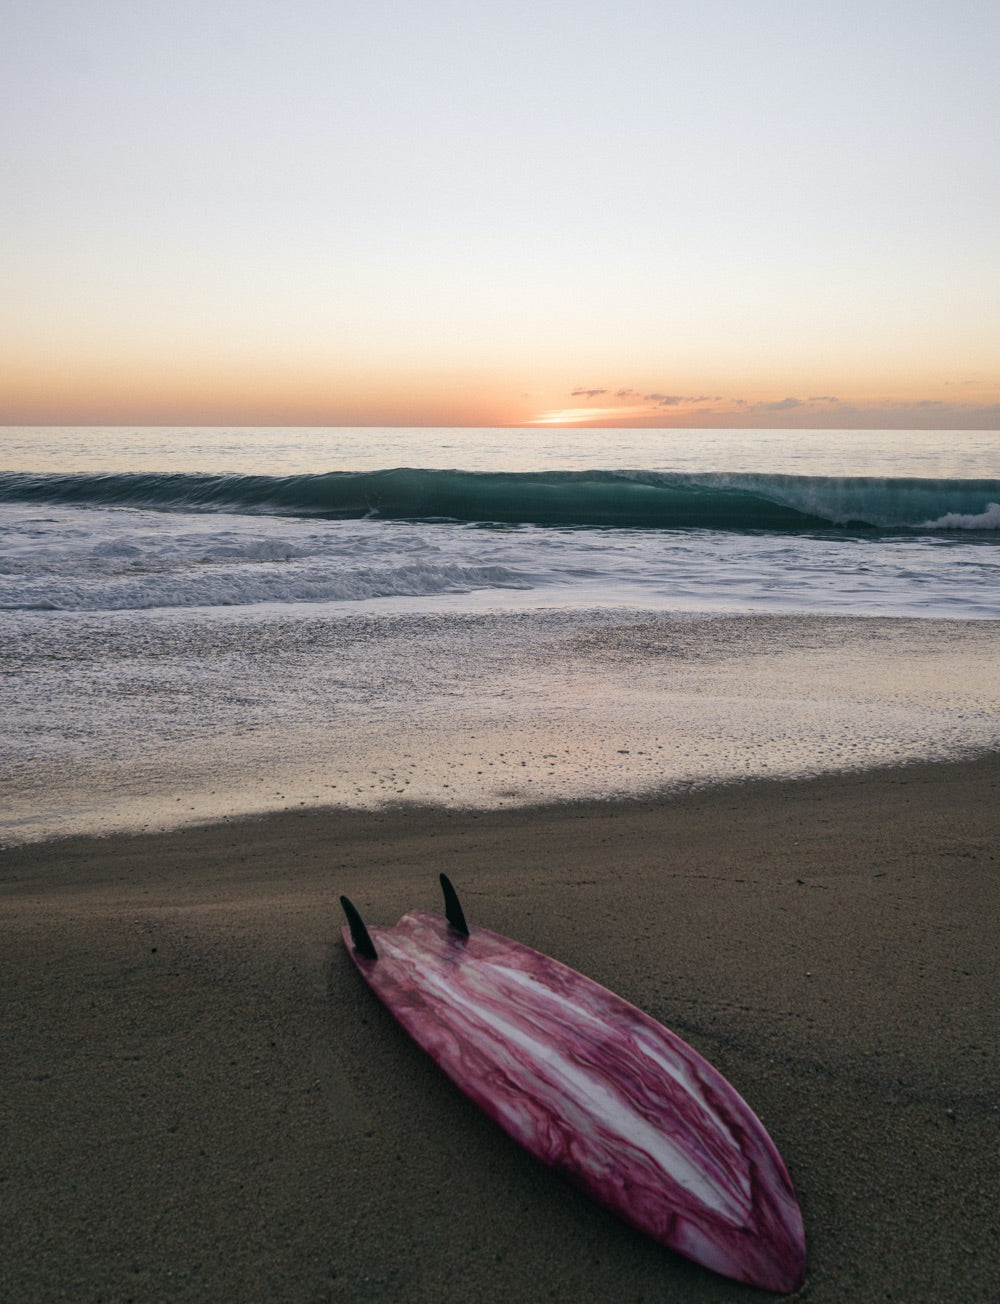 A twin fin surfboard lays in the sand at sunset as a wave breaks in the background